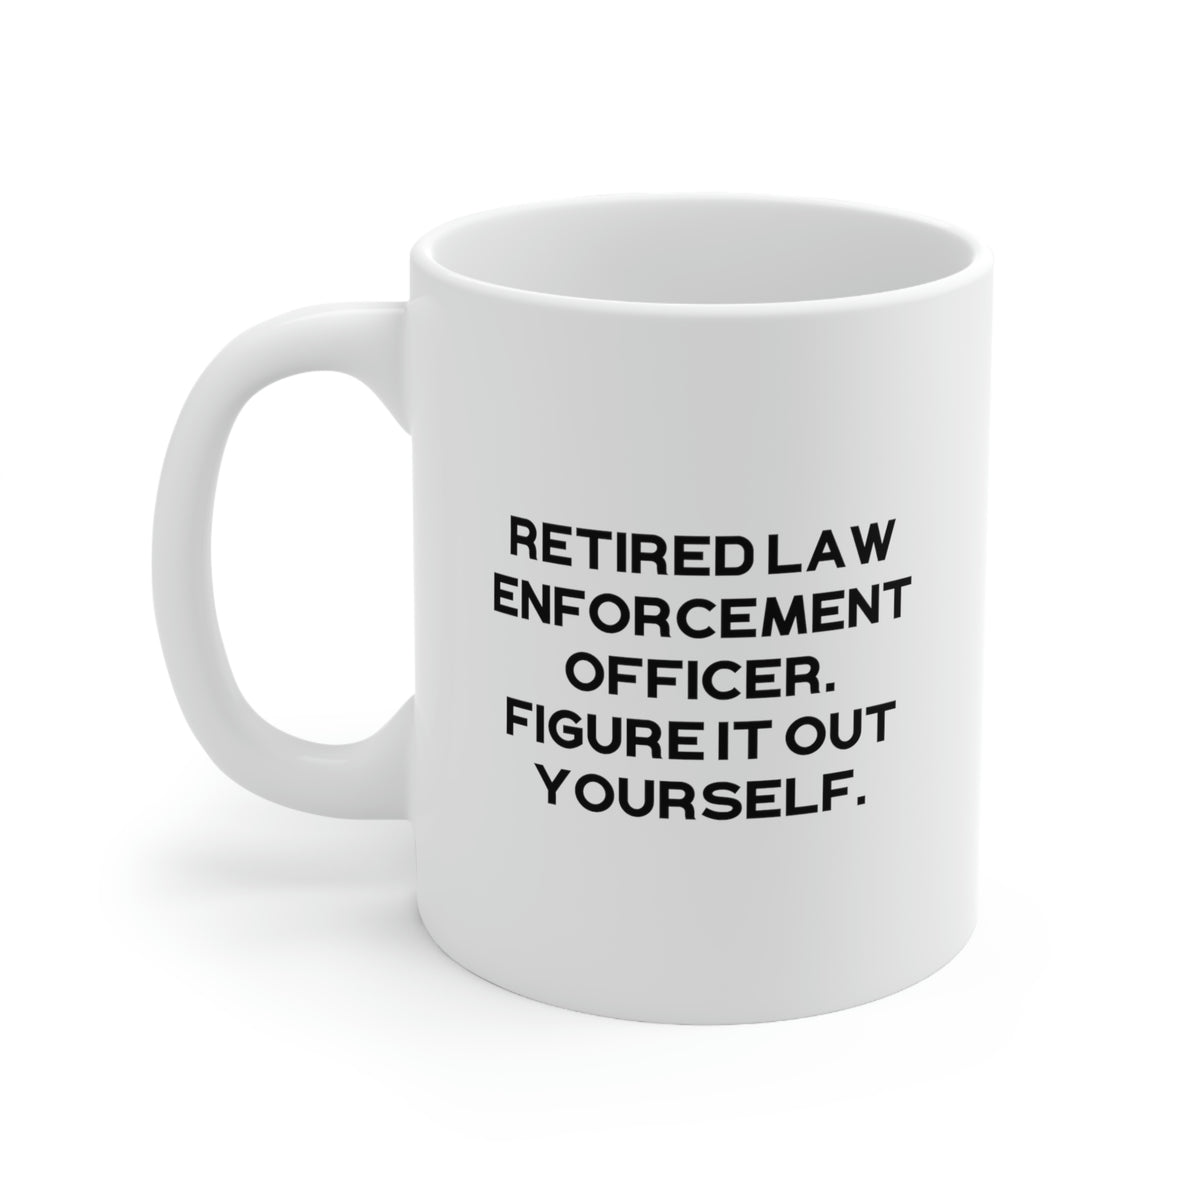 Unique Law enforcement officer Gifts, Retired Law Enforcement Officer. Figure It Out, Cool Holiday 11oz 15oz Mug From Colleagues